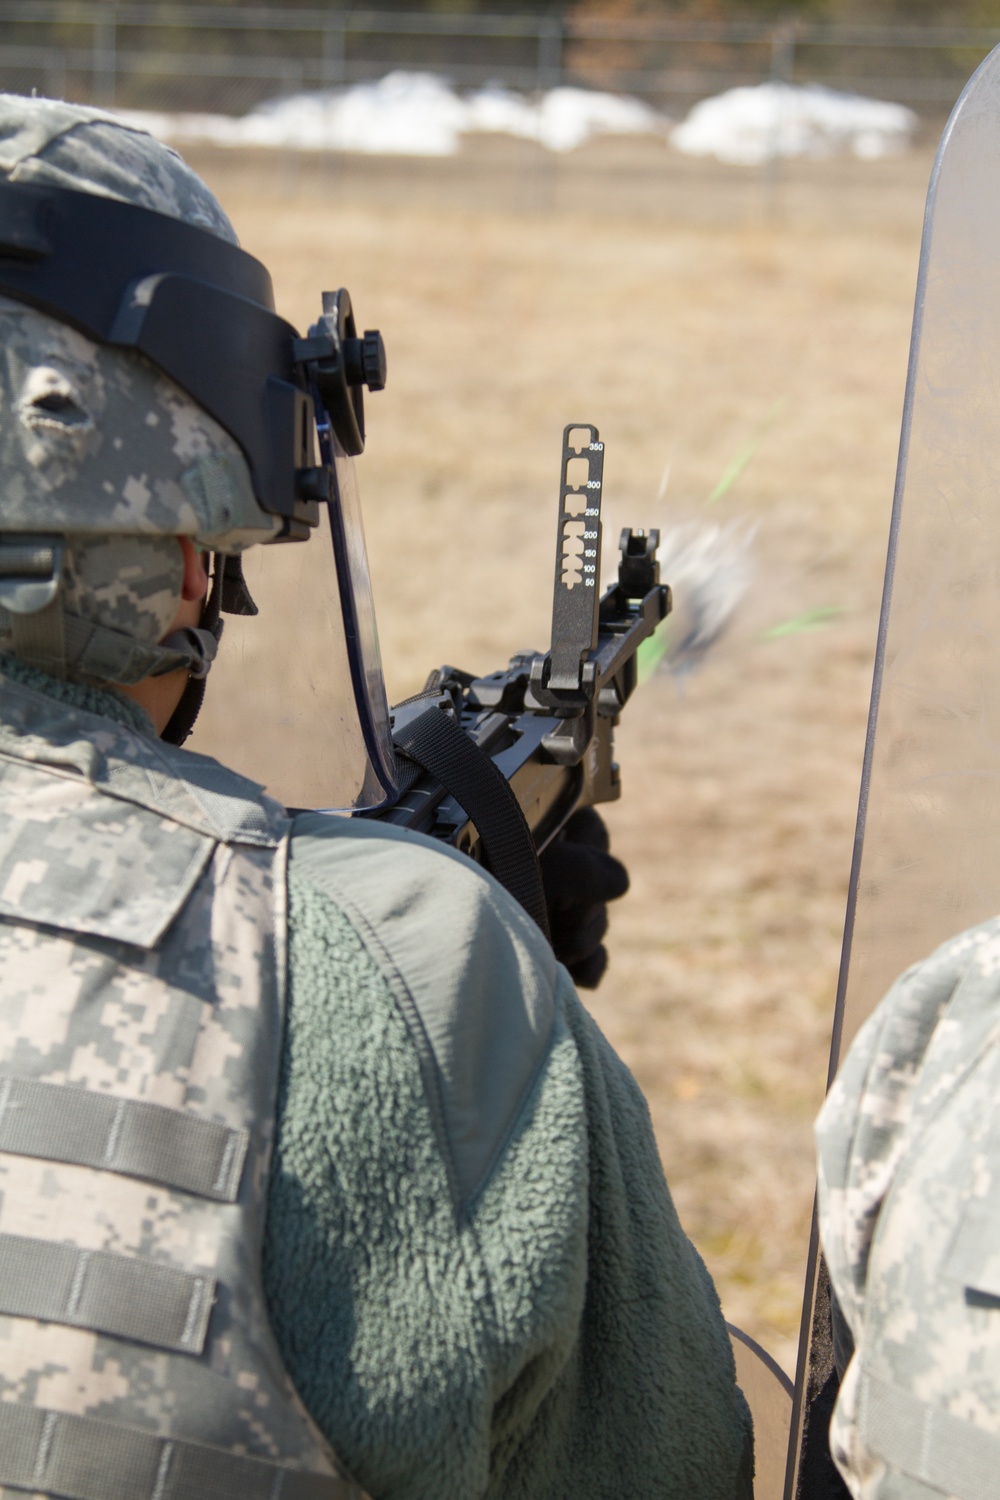 493rd Conducts Crowd Control Exercise during WAREX 86-14-02 at Fort McCoy, Wis.